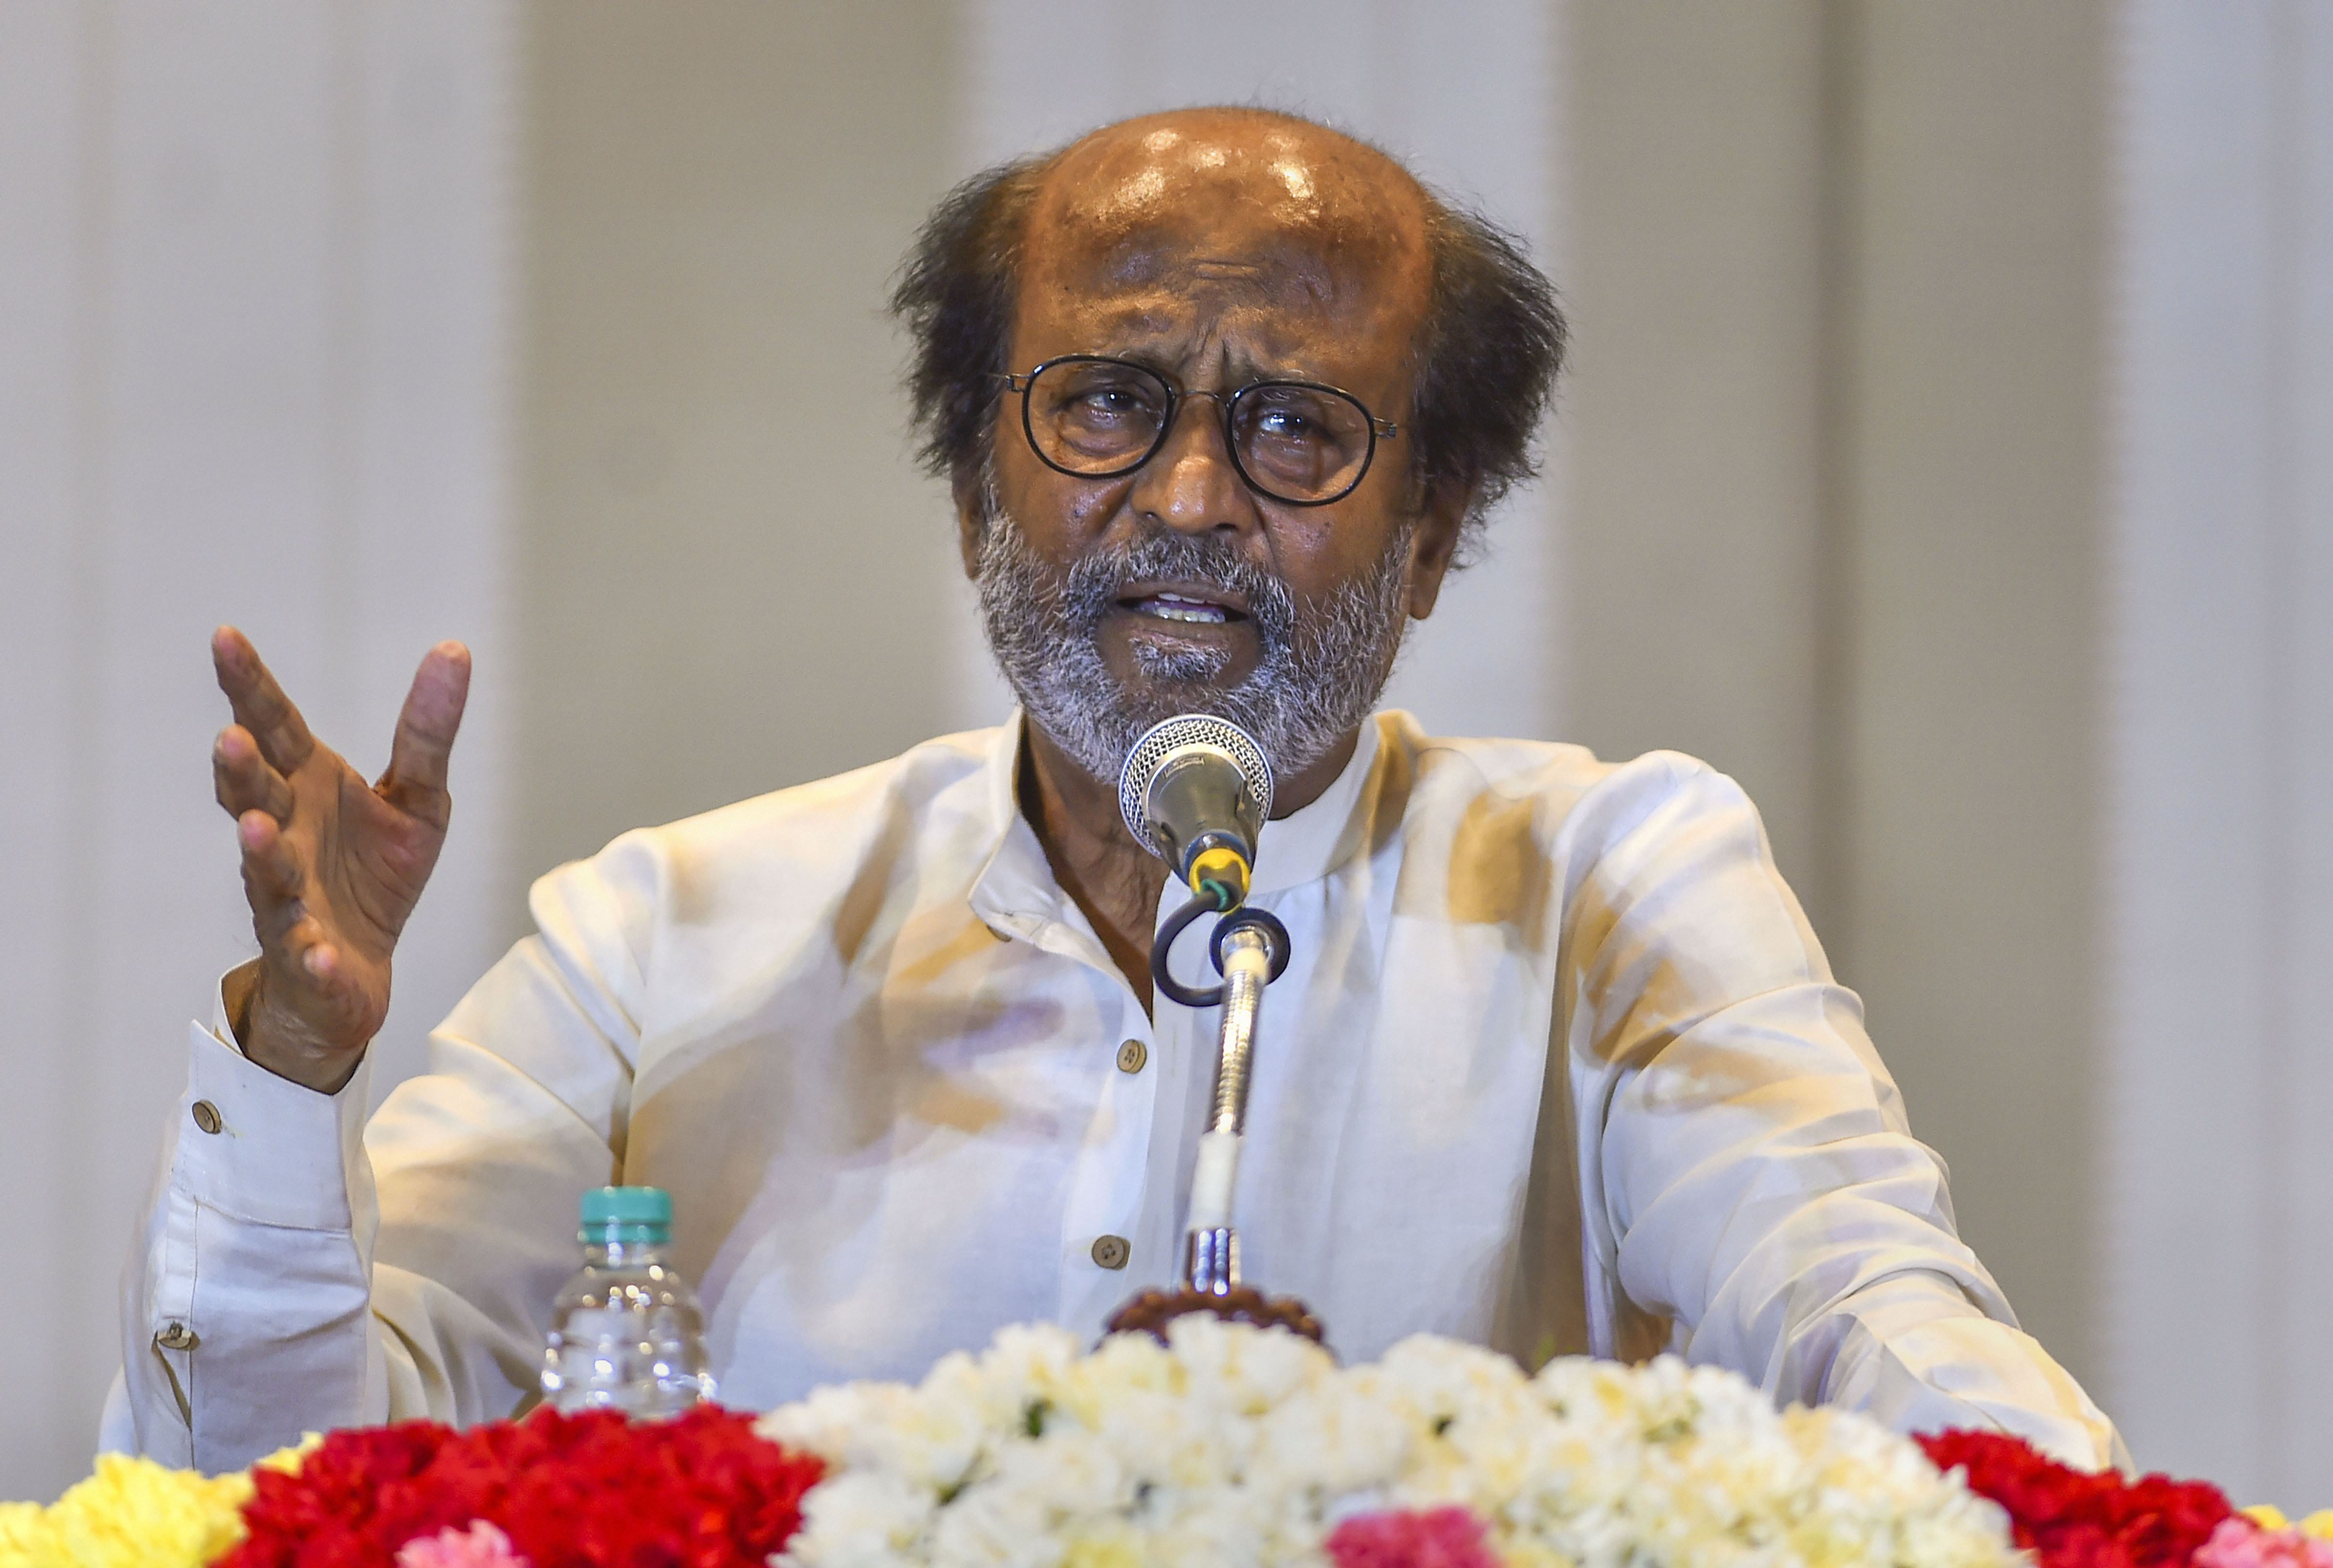 Rajnikanth denies writing leaked letter, says info on health condition true